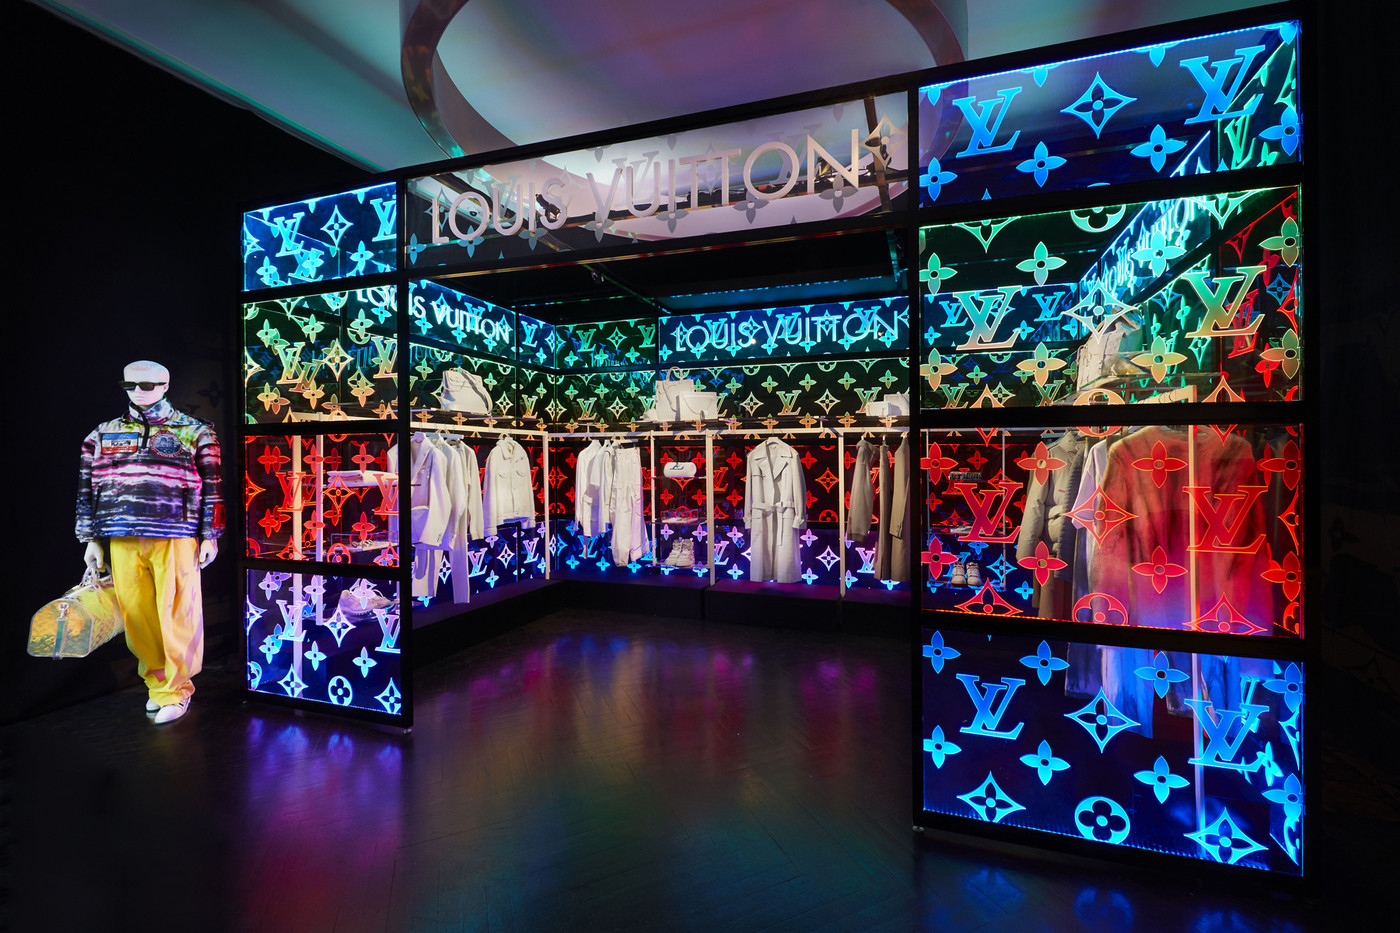 Take a Look into Louis Vuitton’s Pop-Up For Virgil Abloh’s SS19 Debut Collection